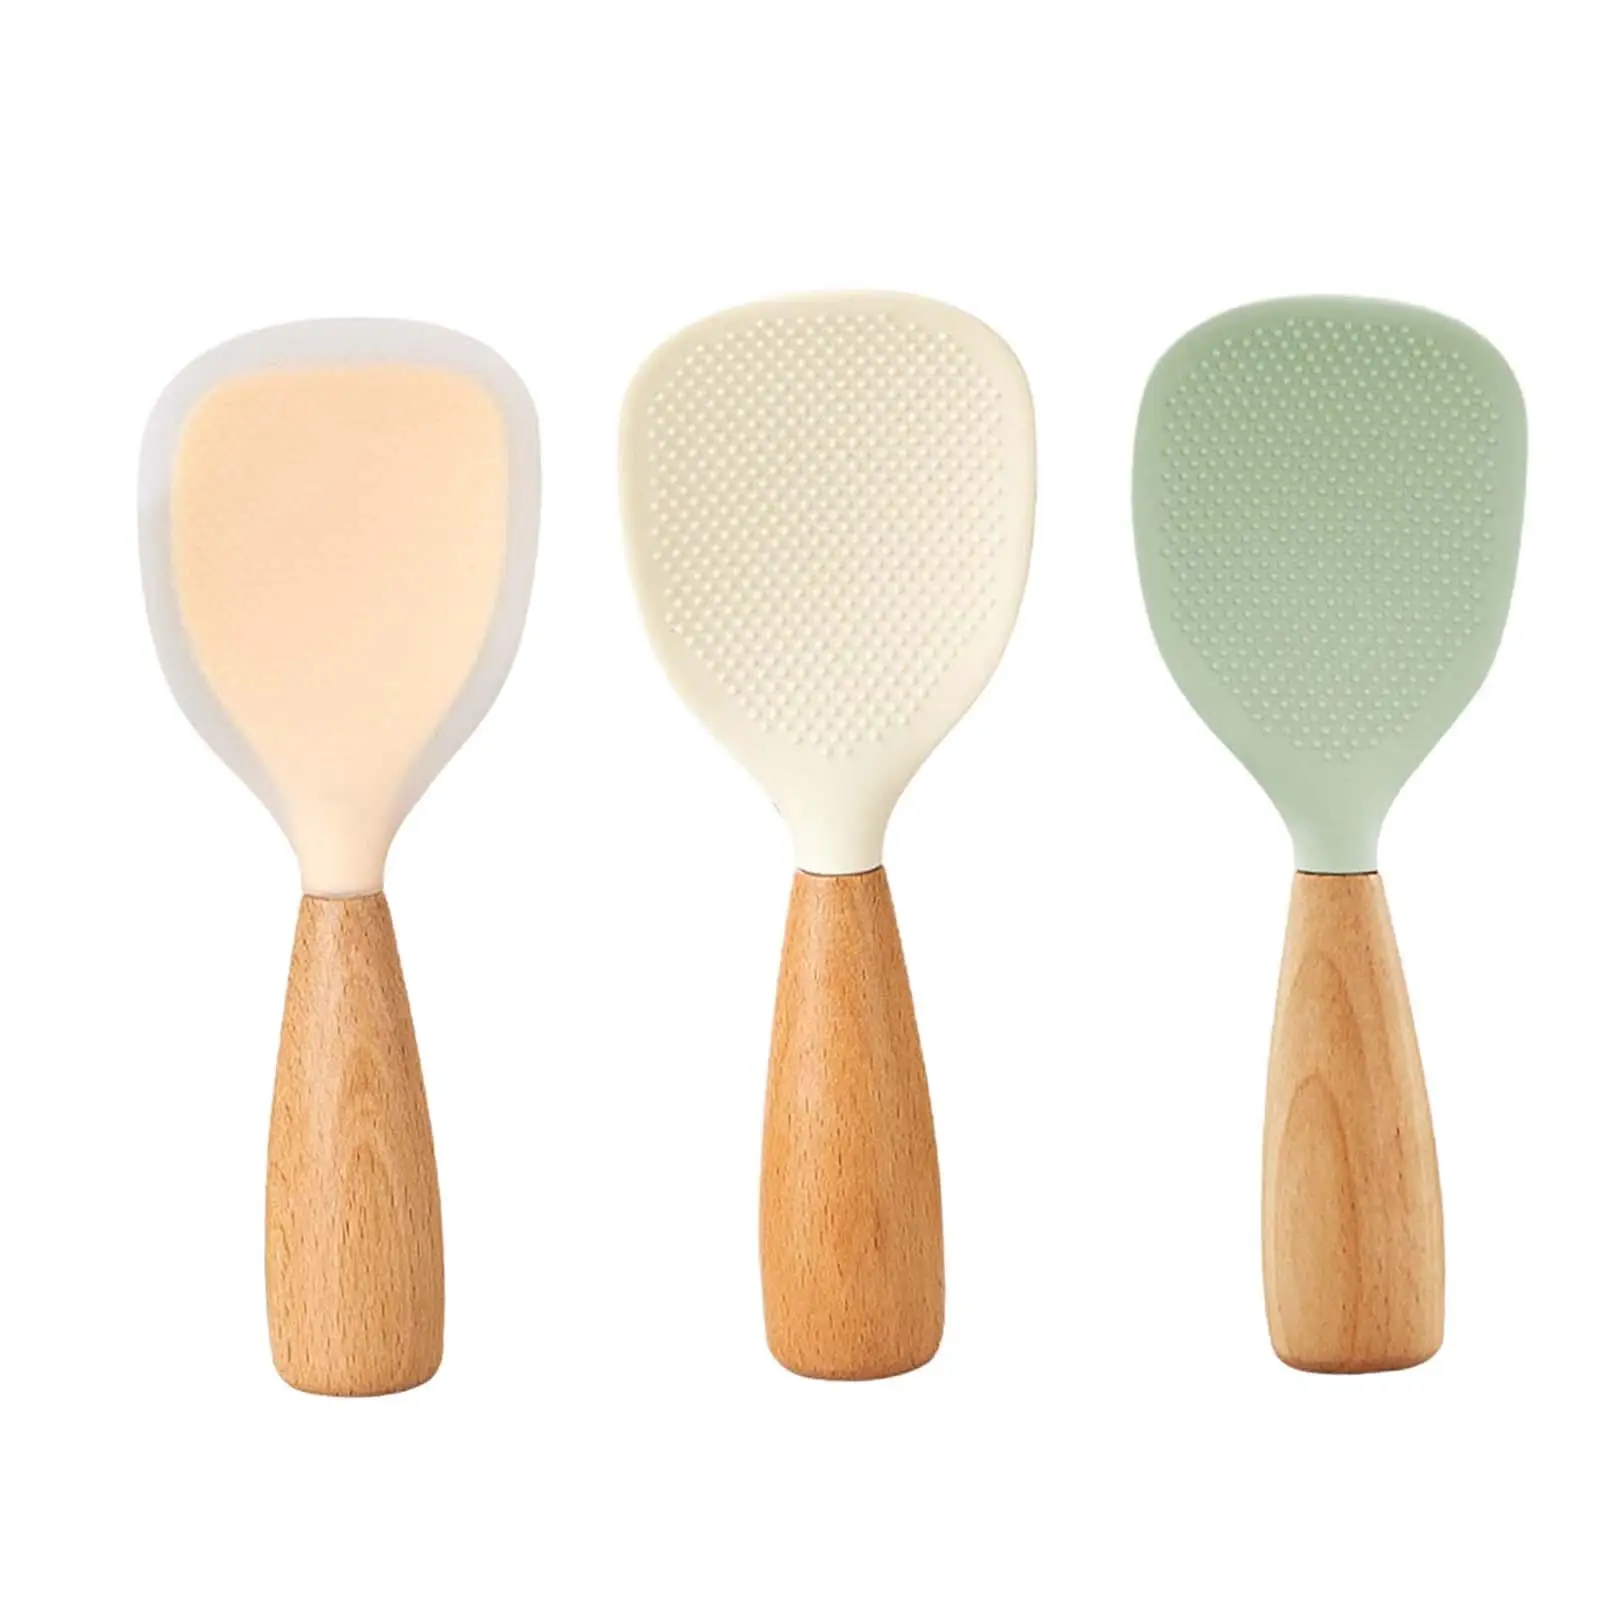 Rice Paddle Reusable Cooking Utensil with Wood Handle Food Service Scoop for Home Mashed Potato Sushi Rice Gadgets